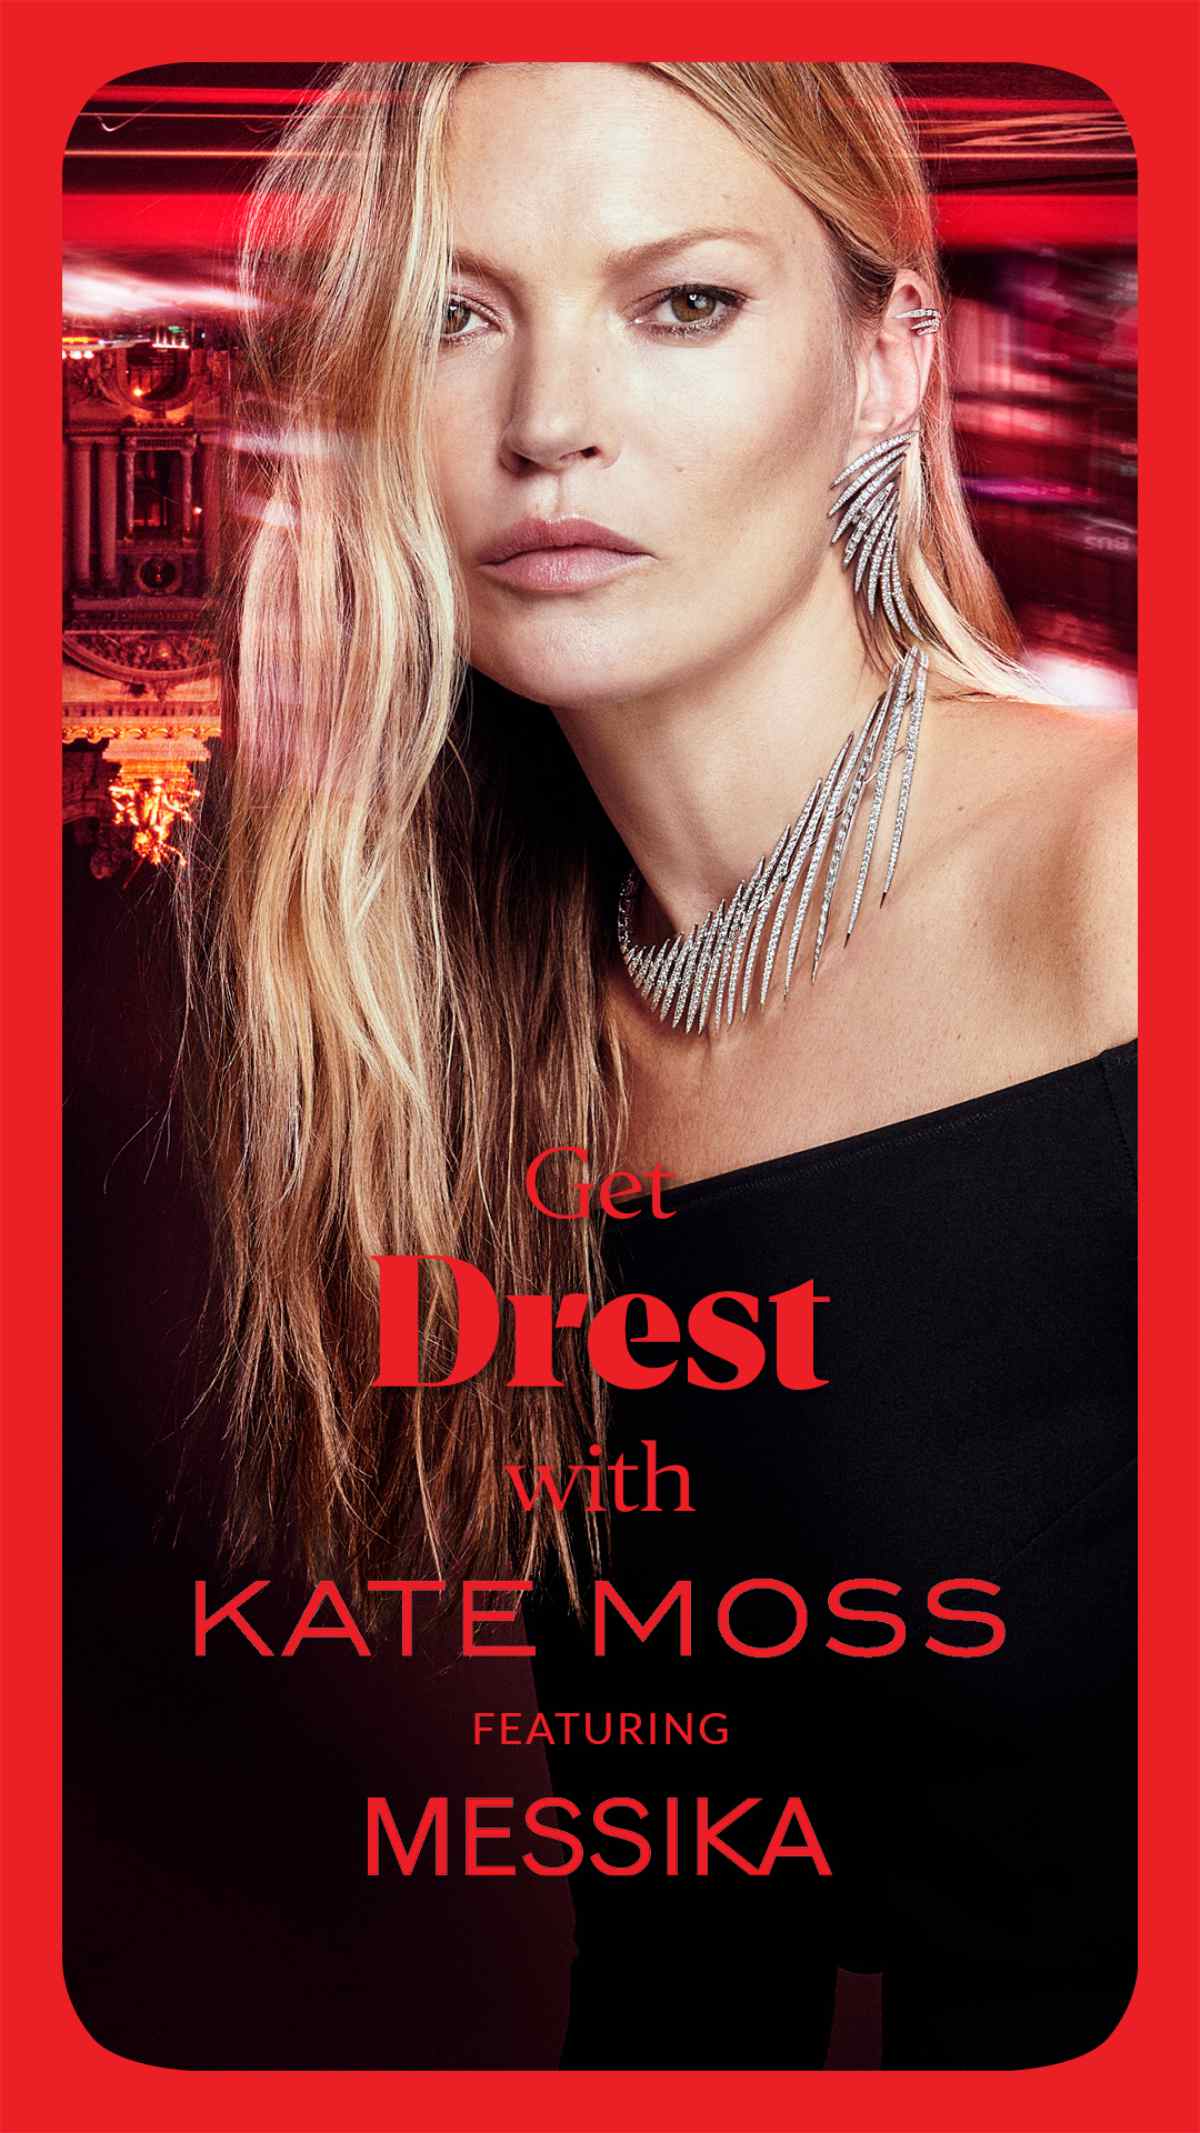 Messika X Drest: Fashion Icon Kate Moss Enters The Drest Meltaverse With Messika